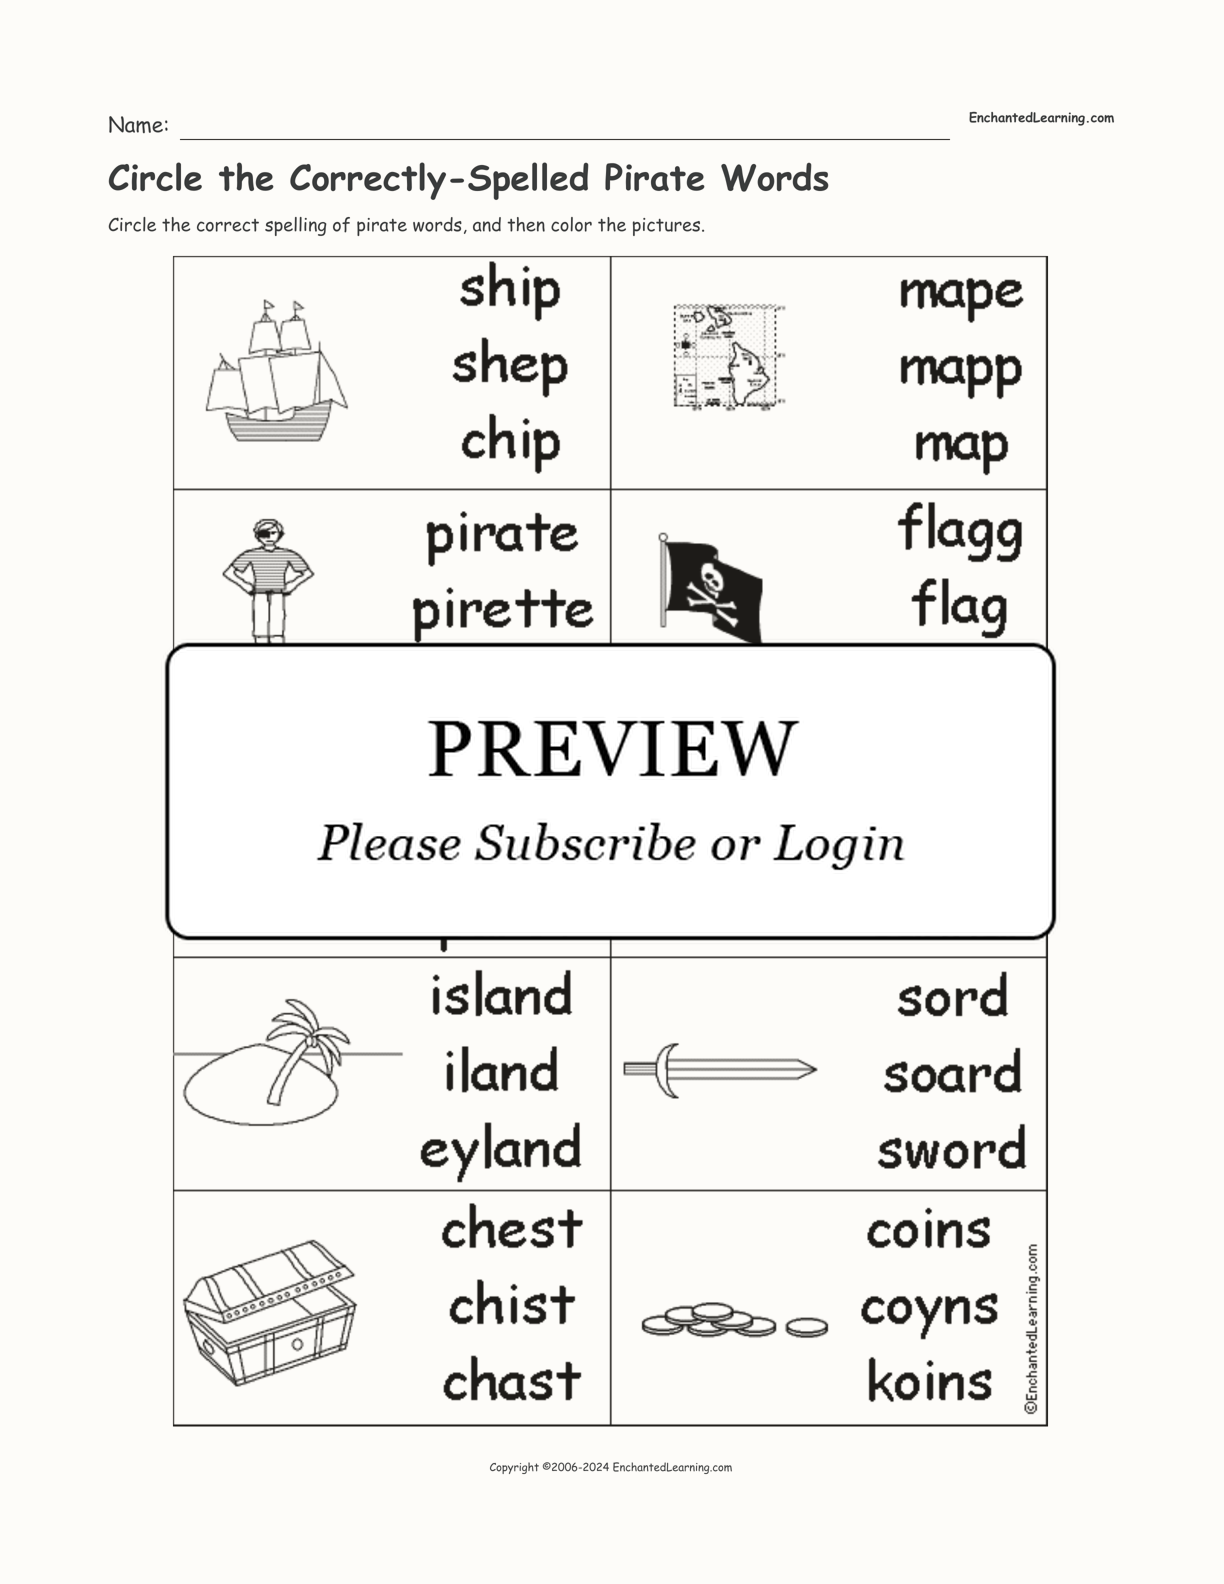 Circle the Correctly-Spelled Pirate Words interactive worksheet page 1